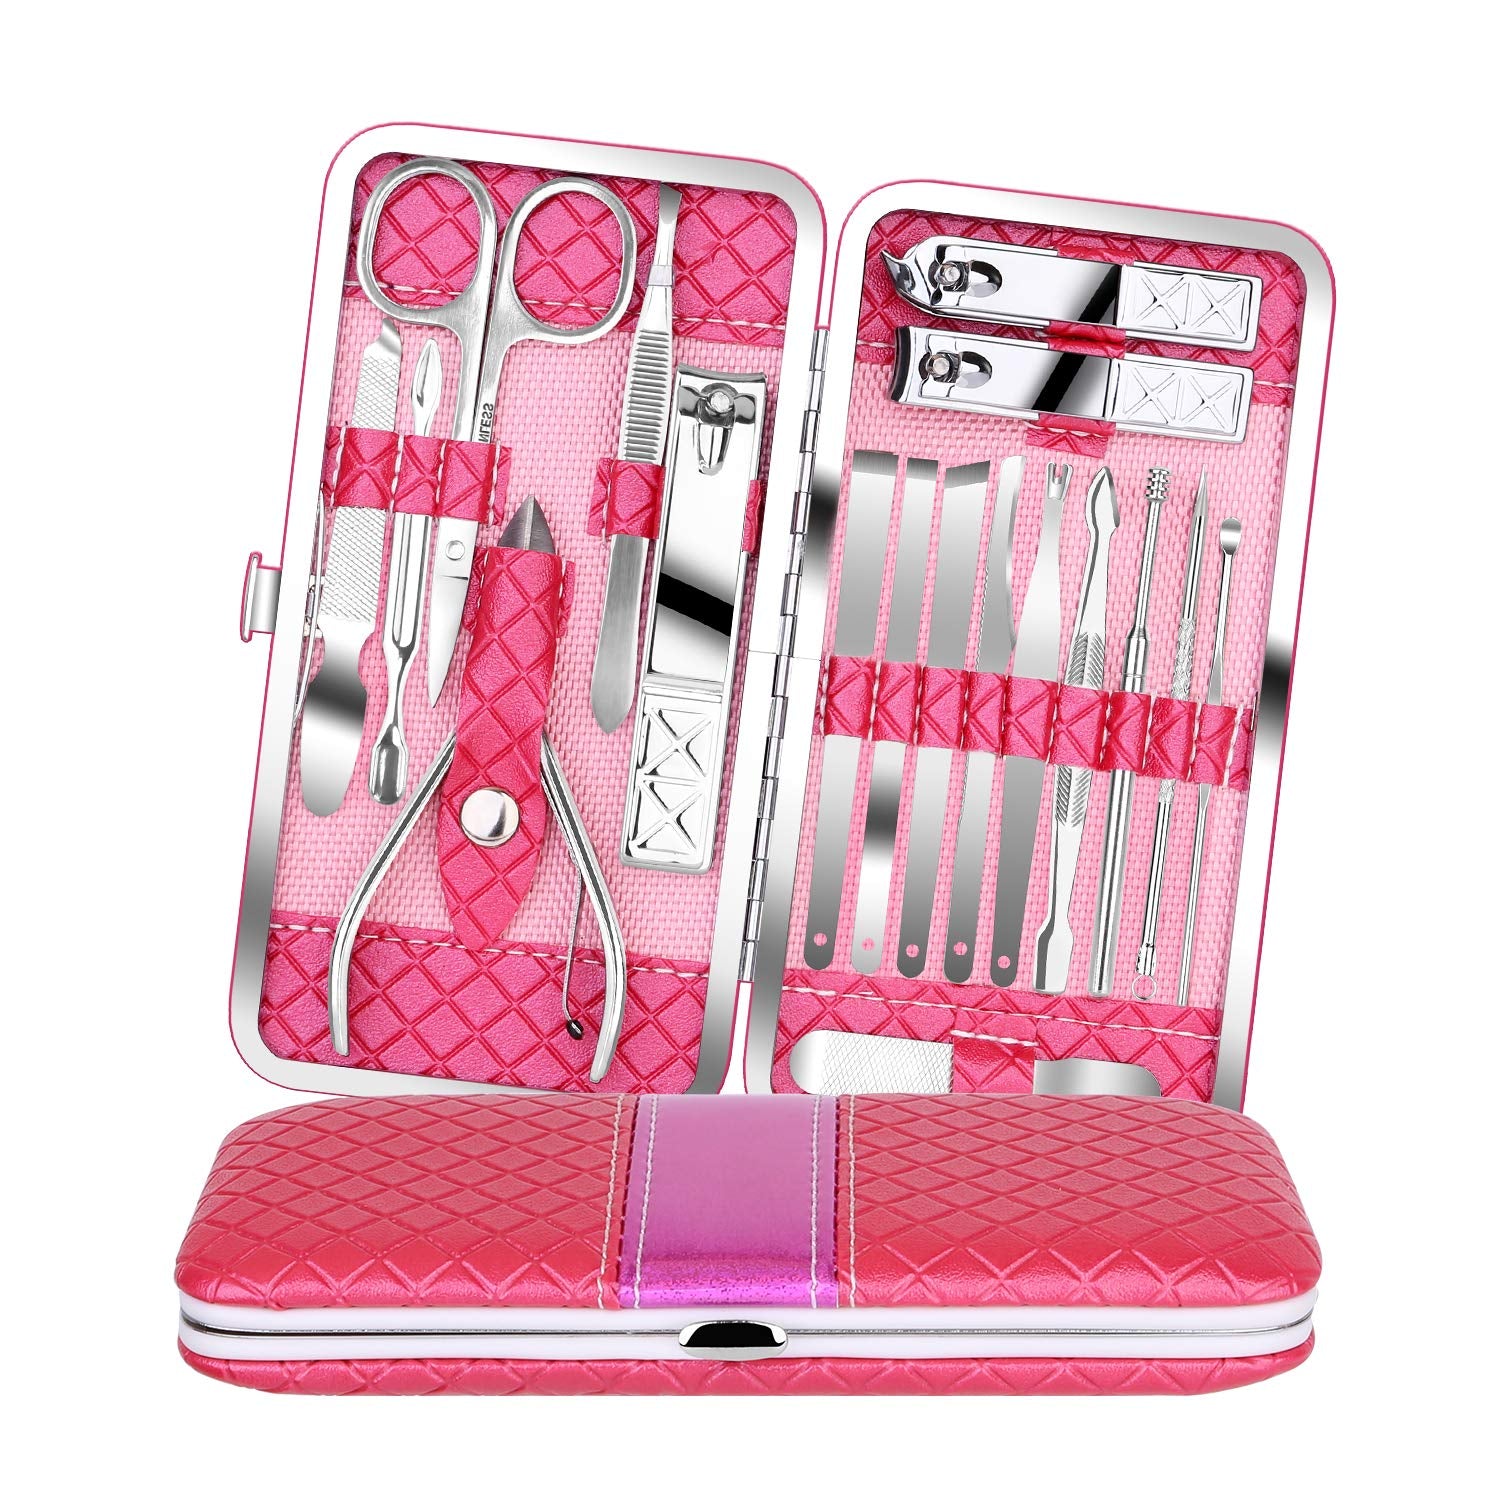 Deluxe 18 Pcs Stainless Steel Professional Manicure Pedicure Set - Nail Clippers Travel Hygiene Nail Cutter Care Set with Leather Case